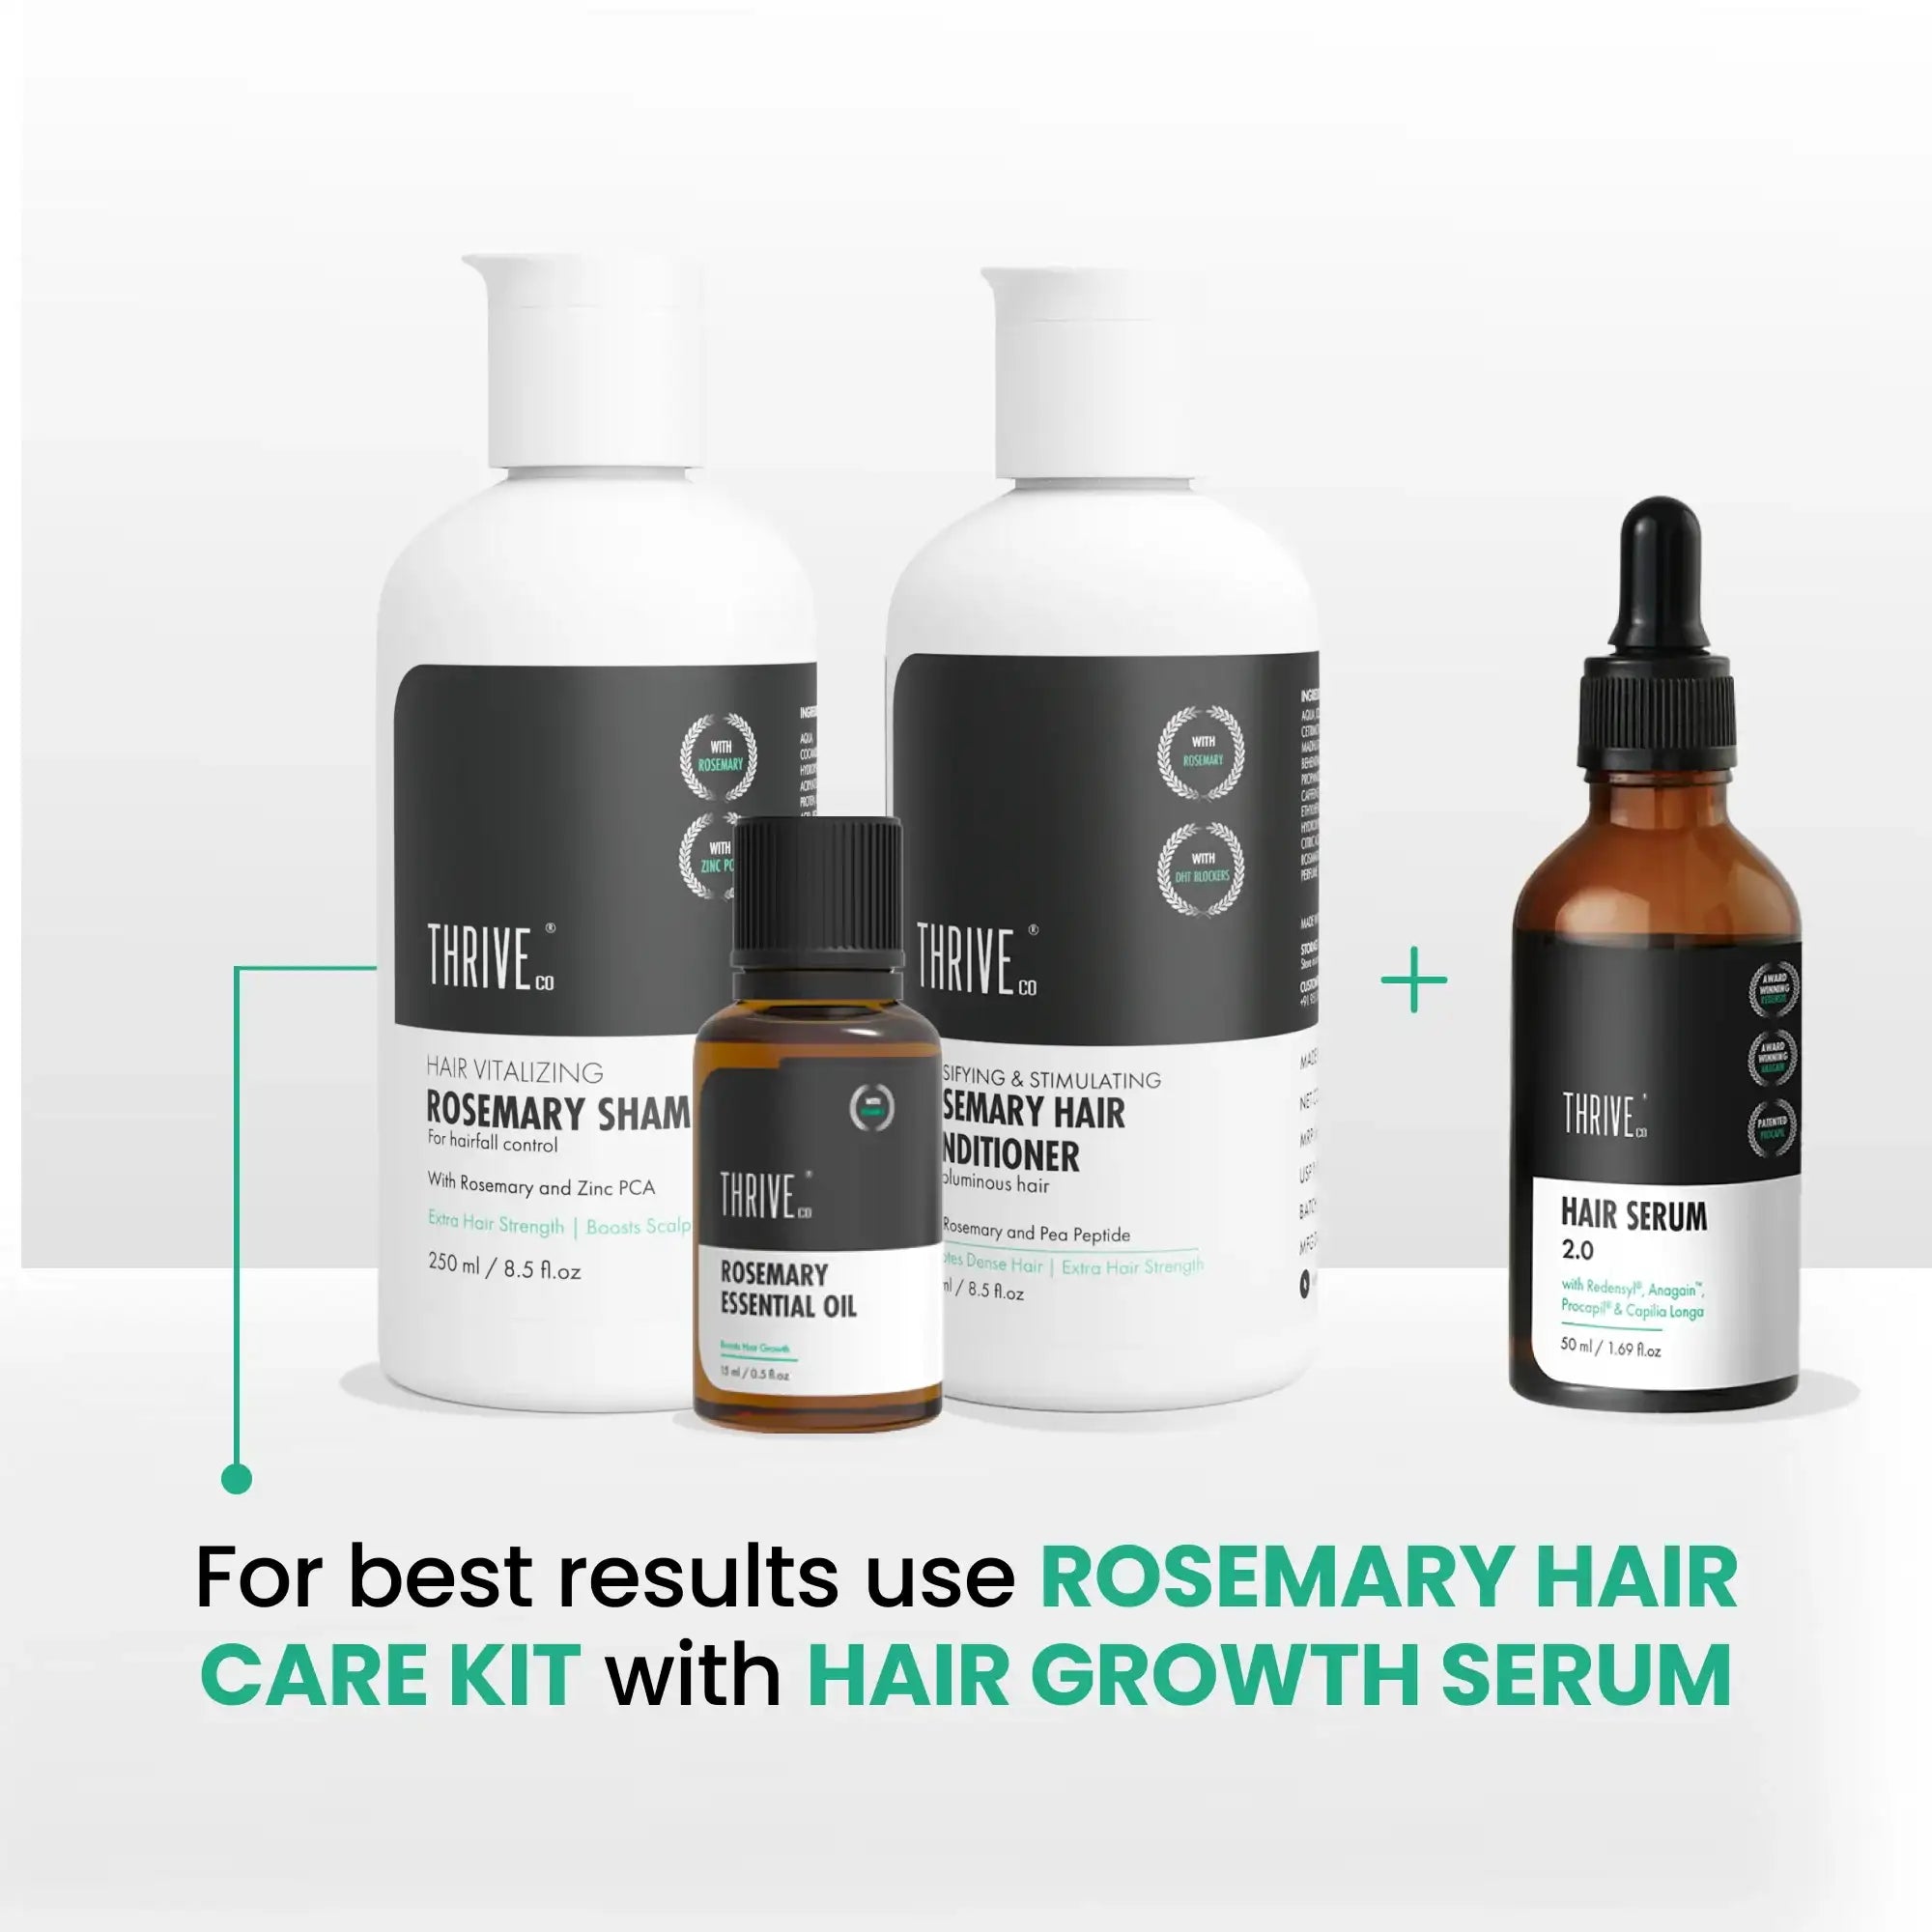 for best results use rosemary hair care kit with hair growth serum